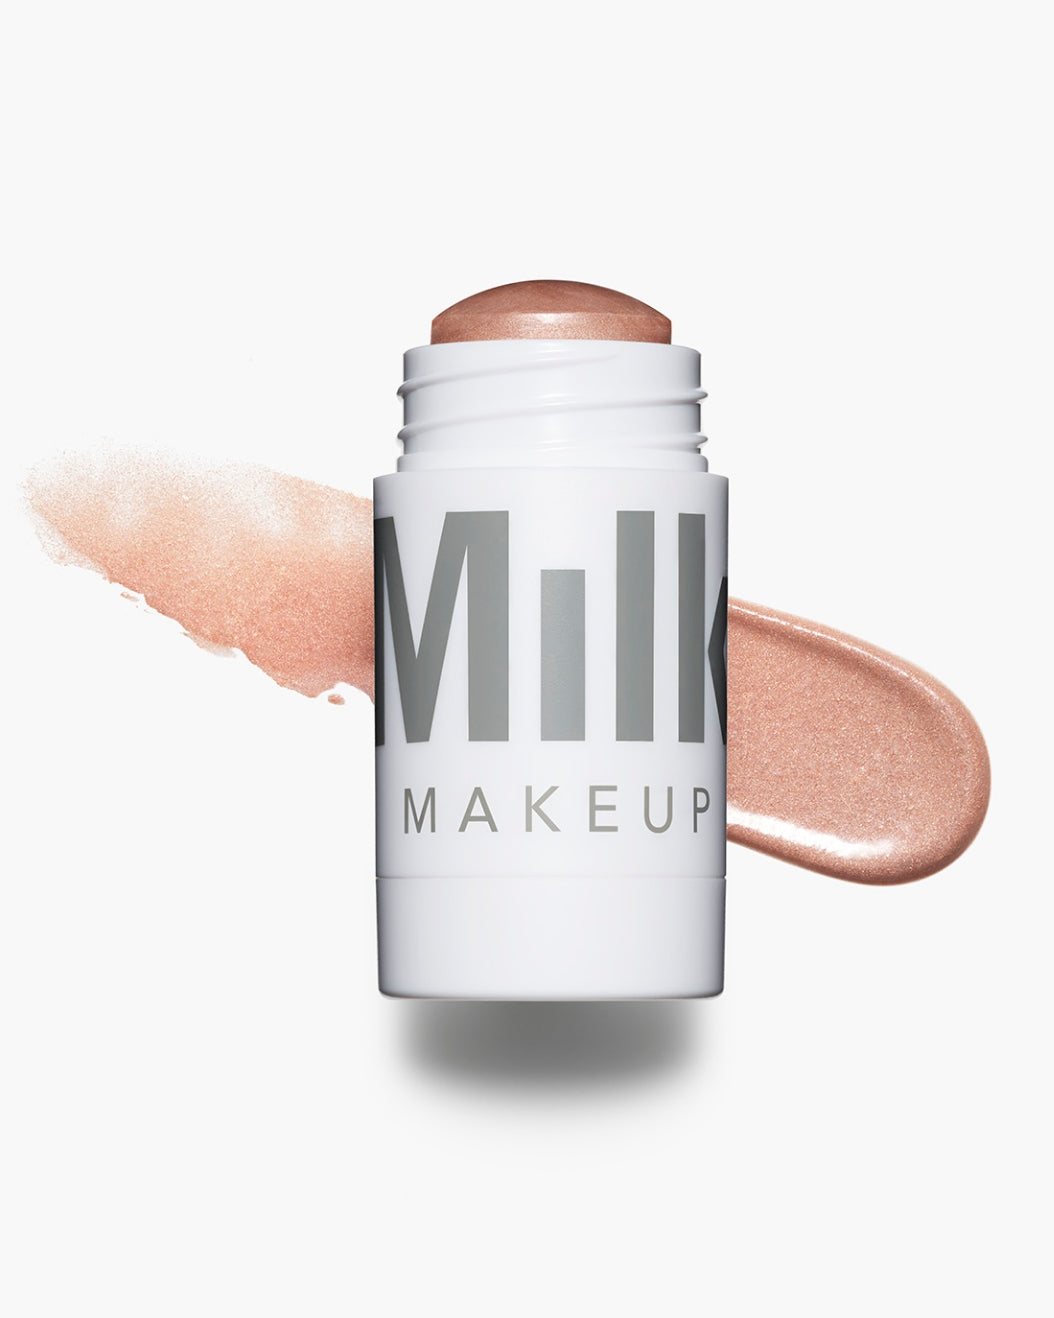 Product shot of Milk Makeup Highlighter in Flare (rose gold) with a swipe behind it against a white background.